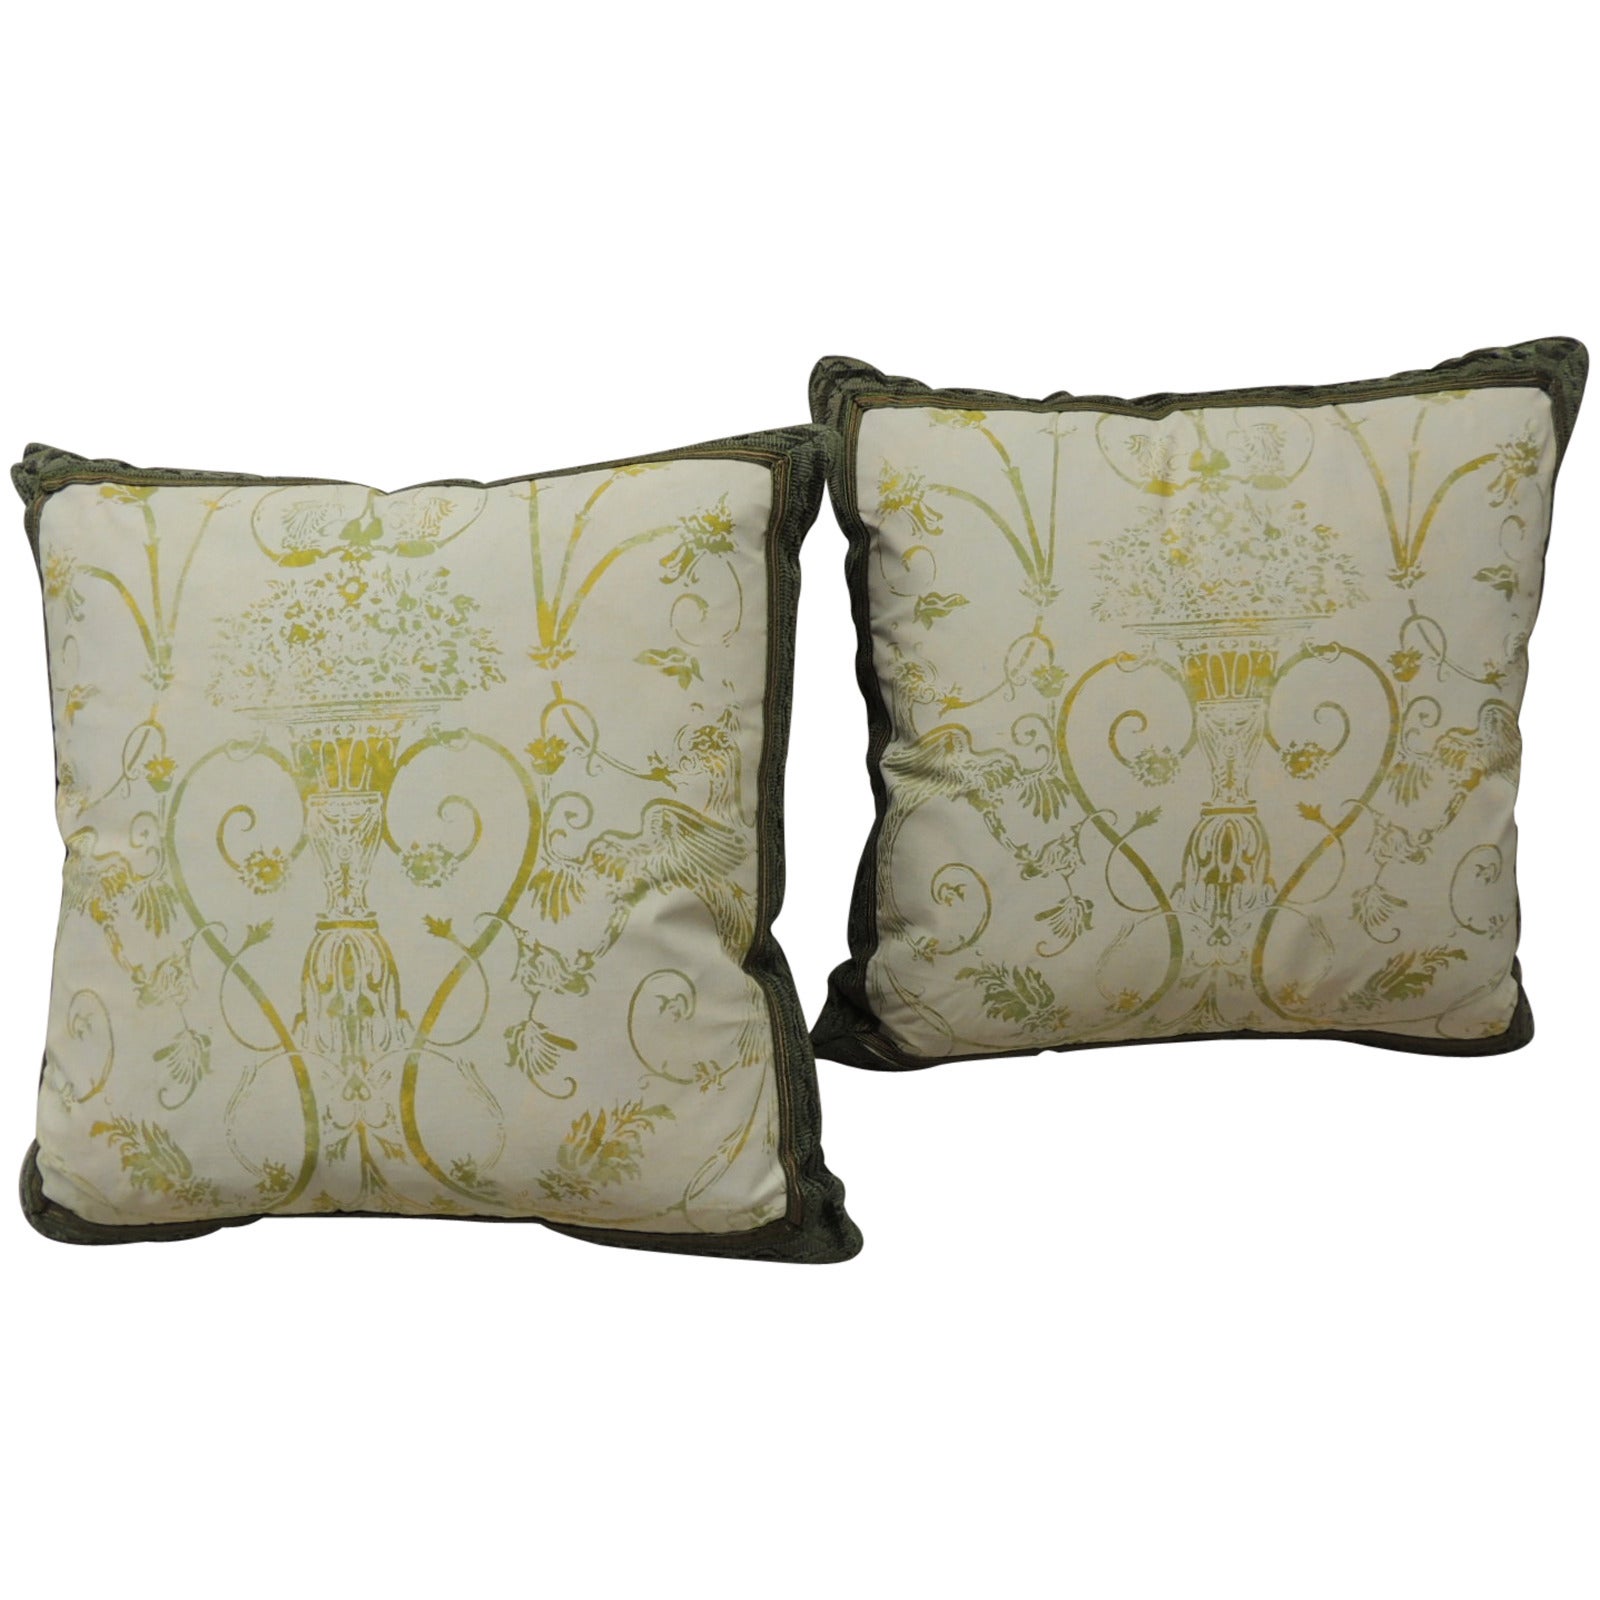 Pair of Verdigris Fortuny Style Floral Decorative Pillows